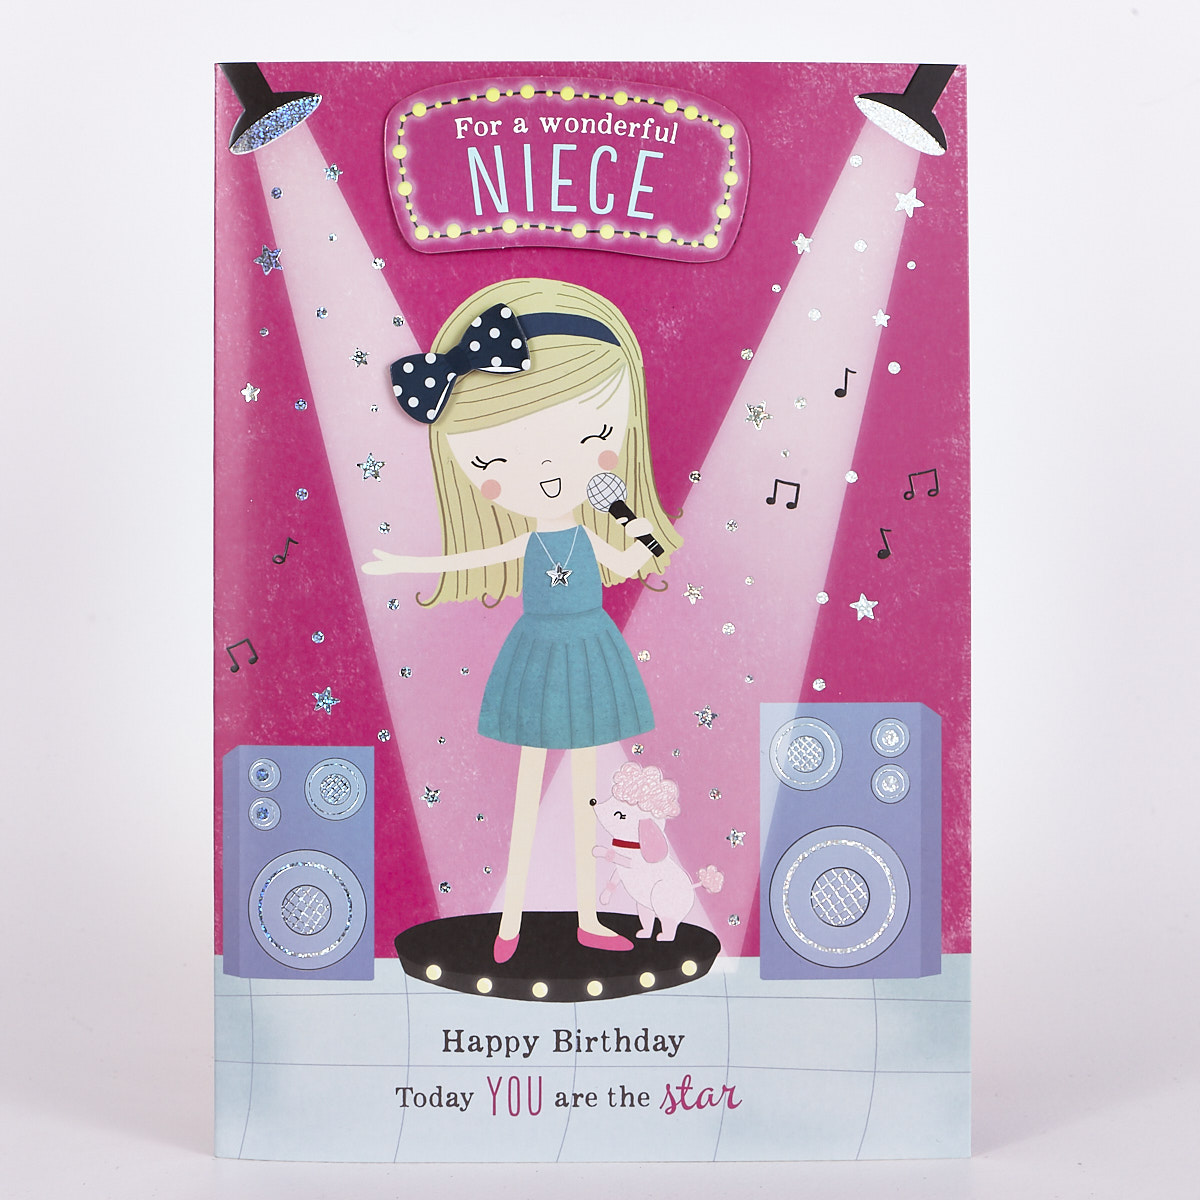 Signature Collection Birthday Card - Niece Singing